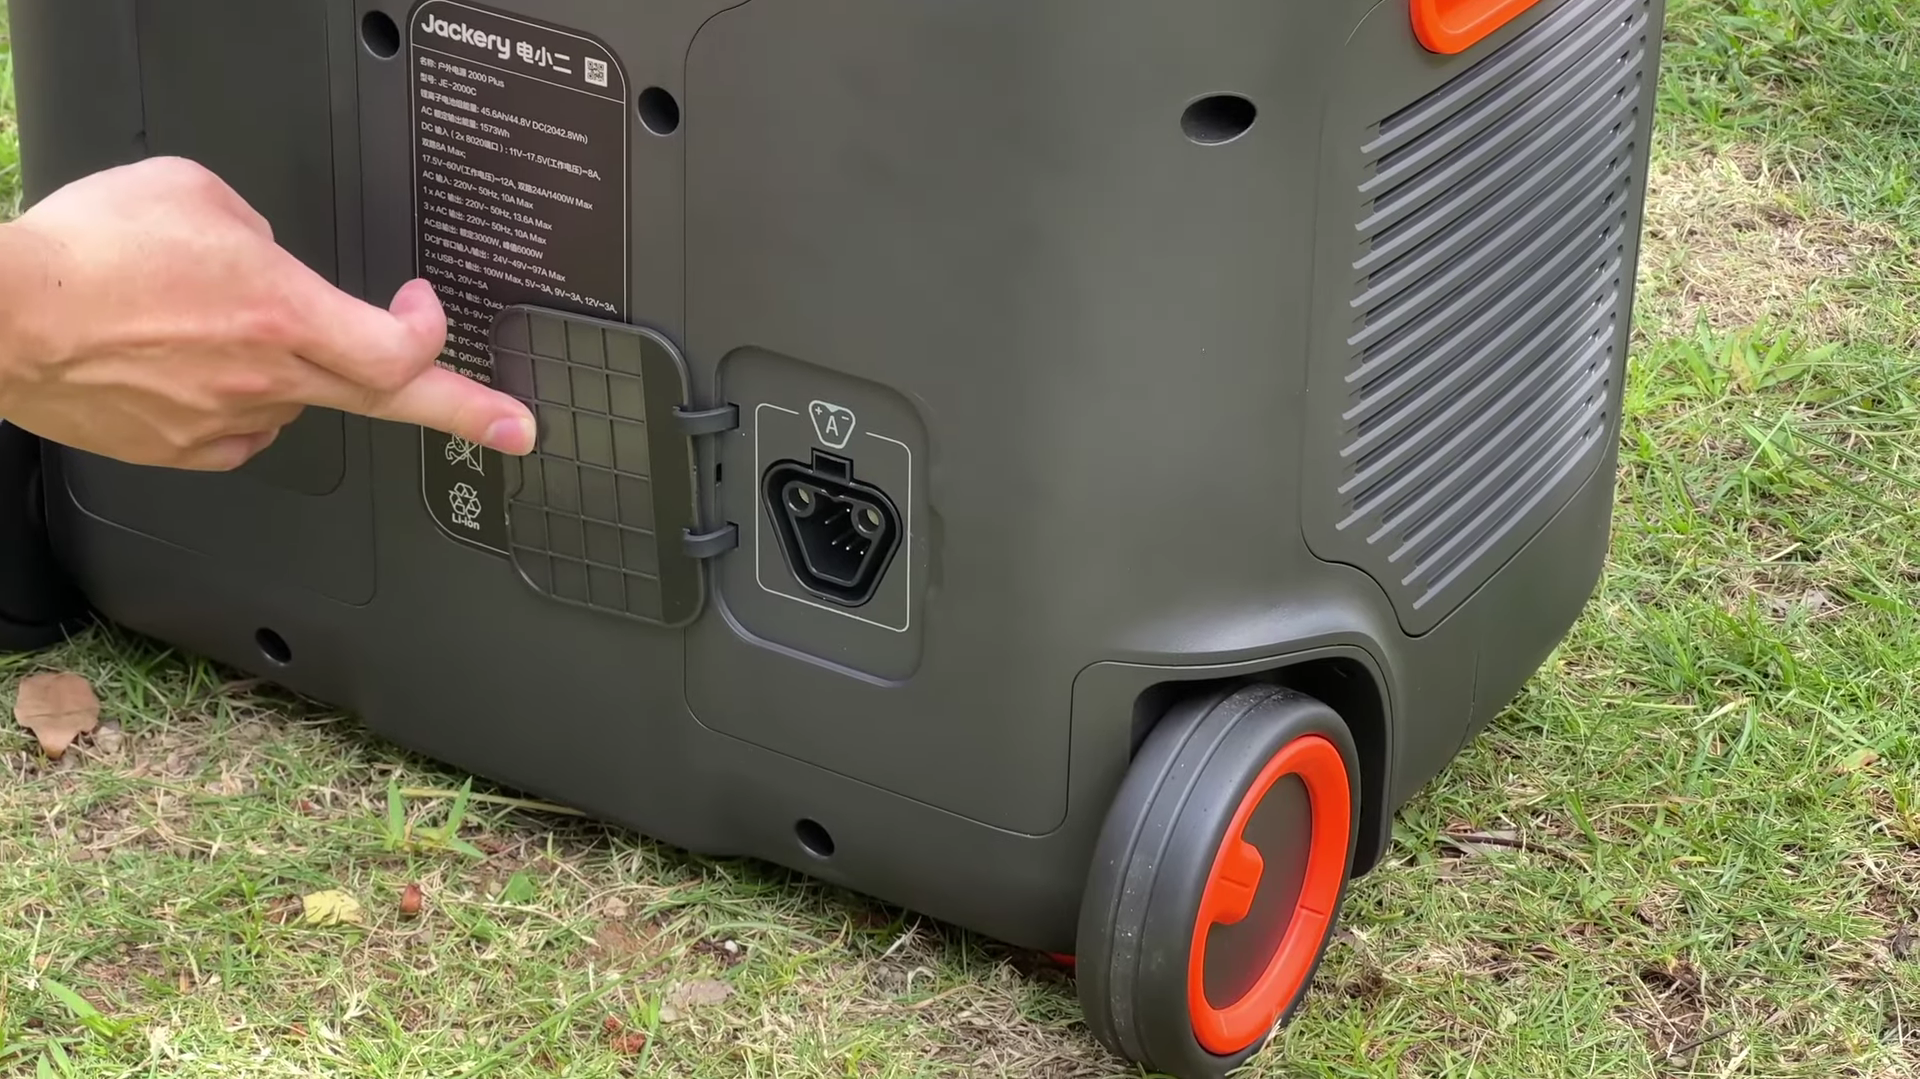 Jackery Explorer 2000 Plus Portable Power Station Review-Chargerlab